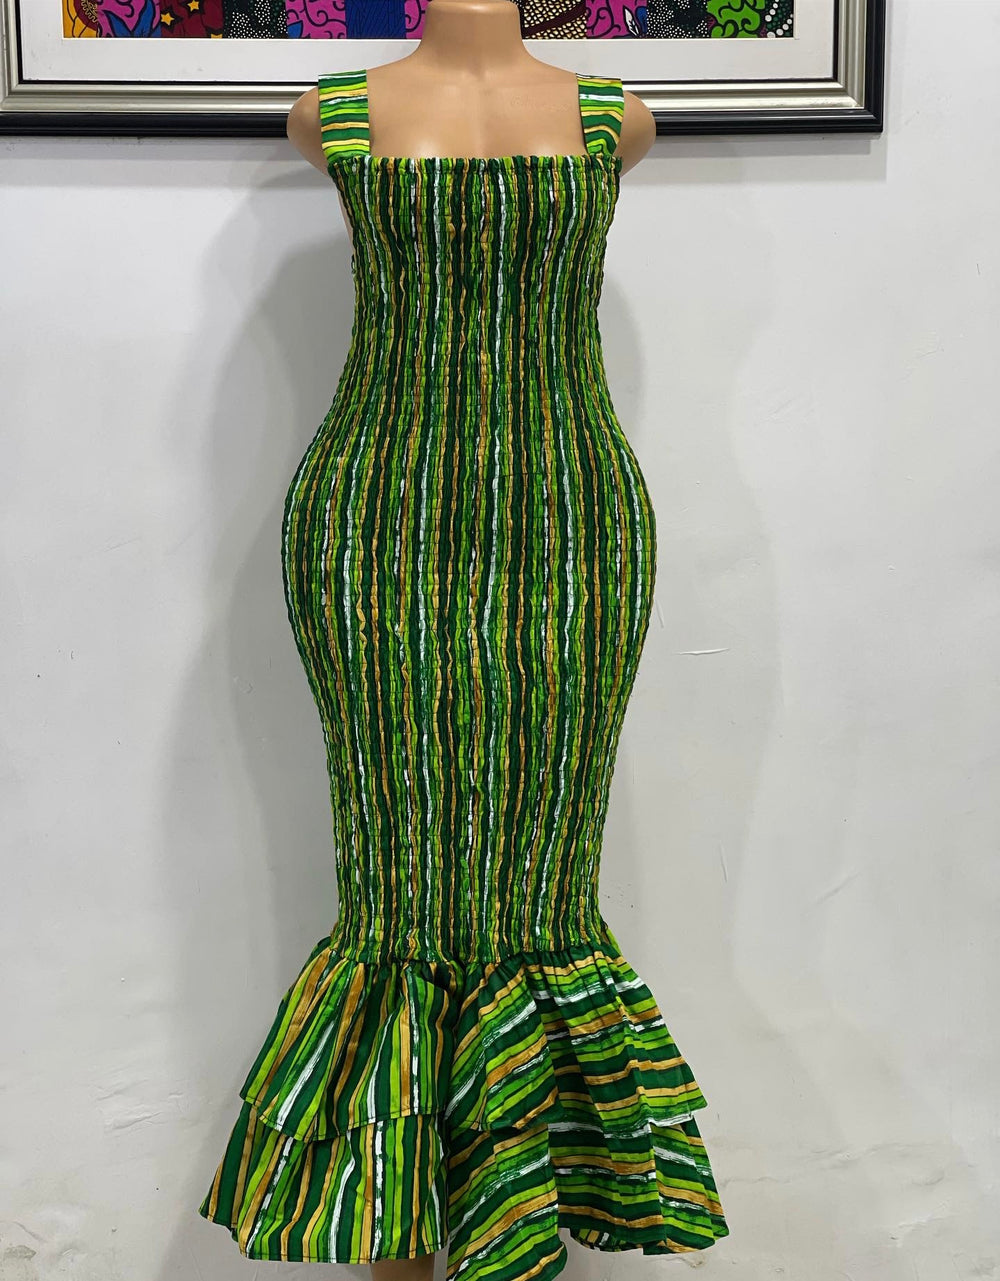 African smoked dress.